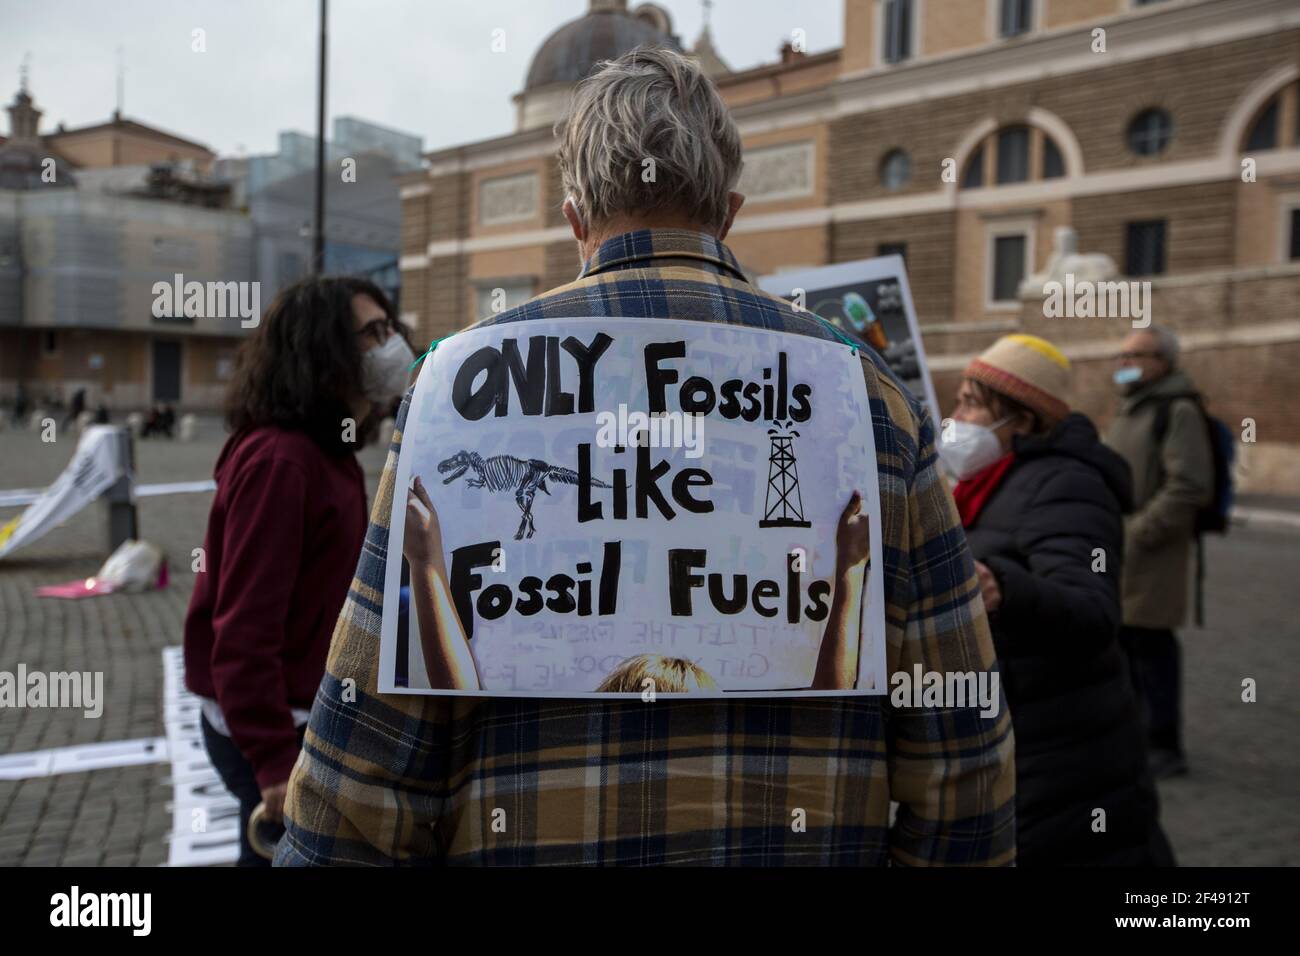 Rome, Italy. 19th Mar, 2021. Fridays for Future Rome held a demonstration in Piazza del Popolo to mark the second anniversary of the Global Strike for Future demonstration. The rally, against global warming and climate change, was organised globally following the 'Fridays for Future' actions directly related to Greta Thunberg. Credit: LSF Photo/Alamy Live News Stock Photo